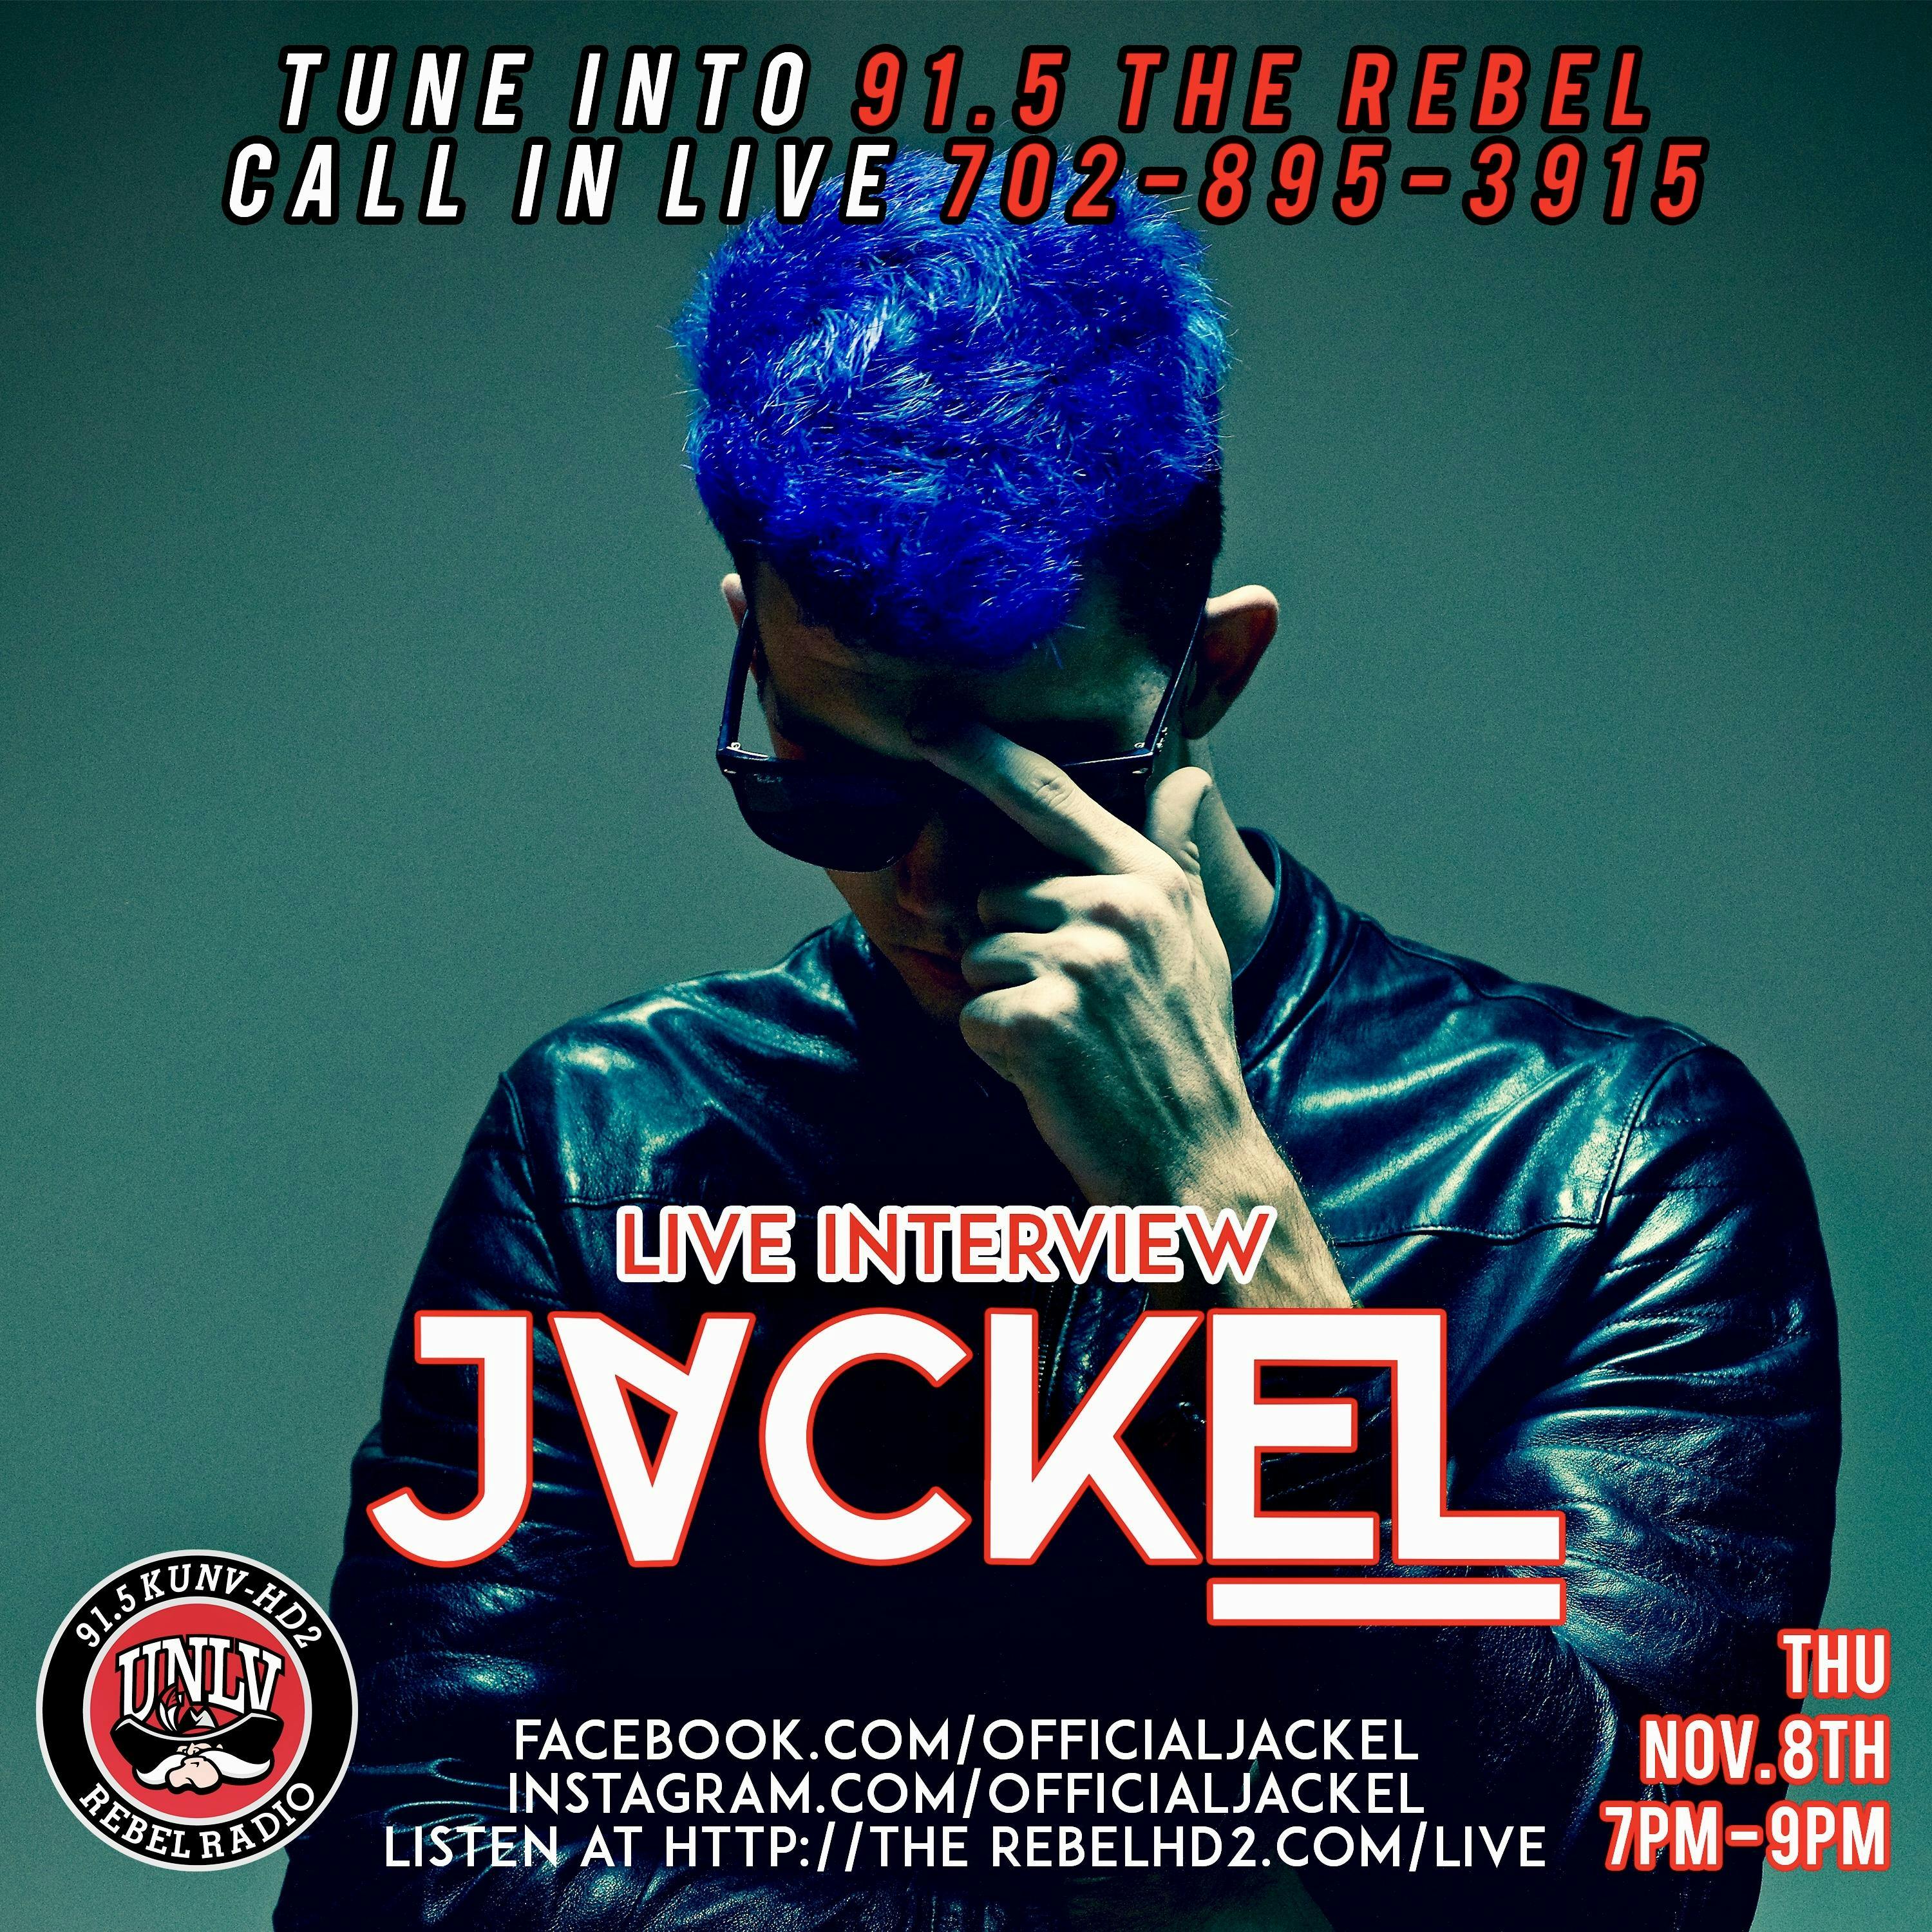 JackEL Live Interview on 91.5 The Rebel